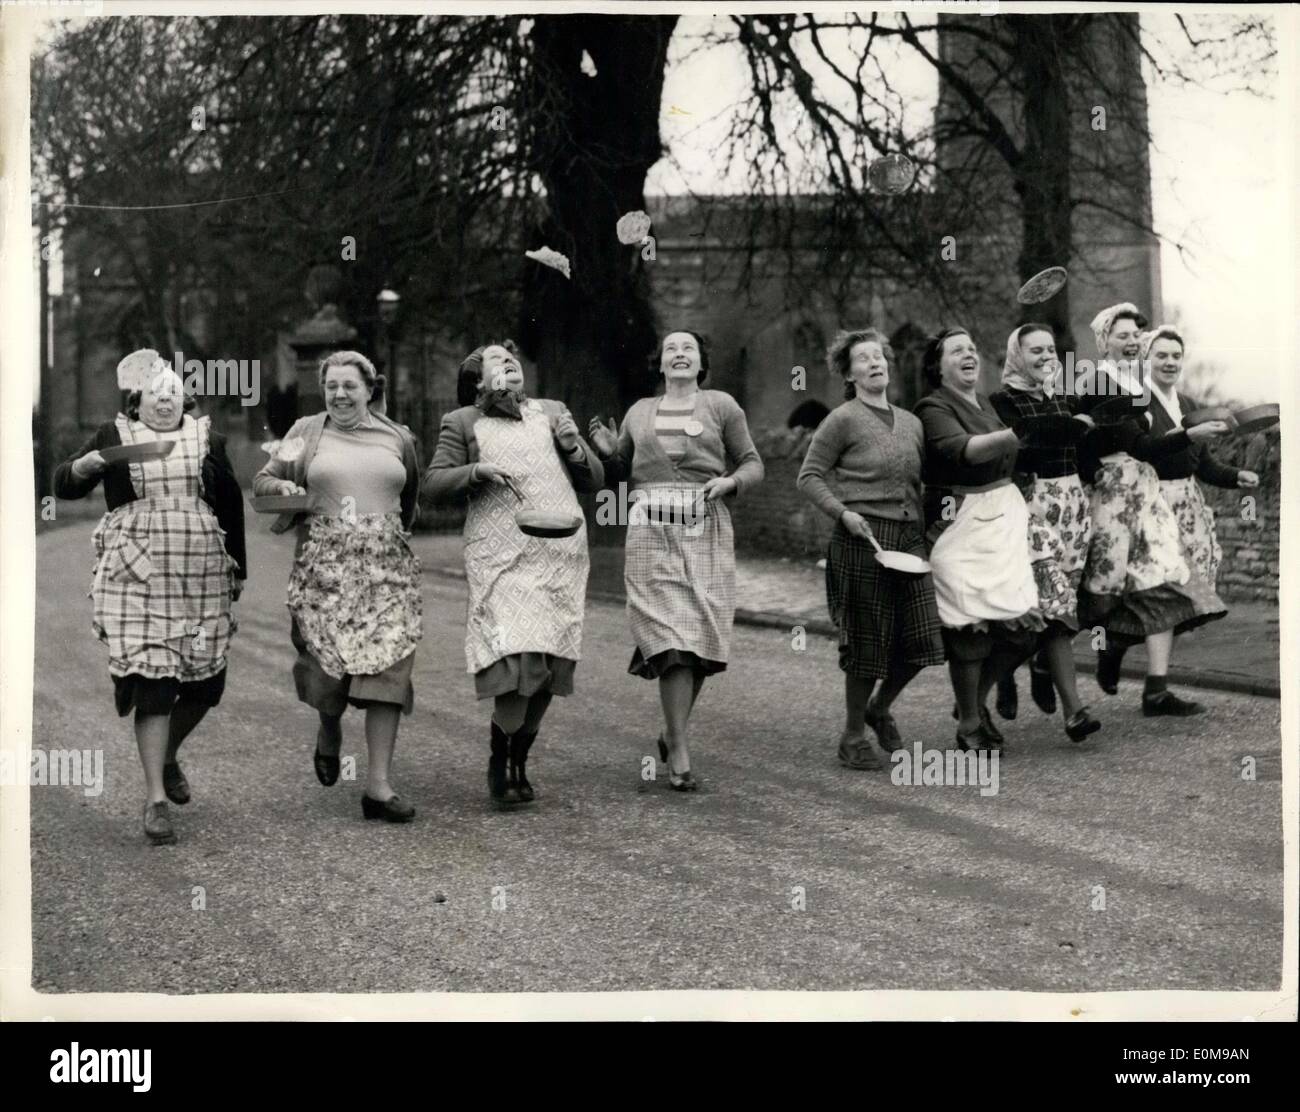 Feb. 25, 1954 - Women-prepare for pancake race: Women contestants in thi year; Shrovetide Pancake race in the old market town of Olneym Burks, are busy practicsing for the race, which takes place nest Tuesday. this year, an old rule of this 500-years old evert is to be revived. Competitors will have to toss their pancakes not once-but three times-at the start, at the finish and half-way while running. Photo shows A line-up of some of teh competitors at teh start of a practice run at Olney today. They are: (L to R): Miss Marjorie Well, Miss Mary wells, Miss W.P ''Illegible'' Burtt, Mrs Stock Photo